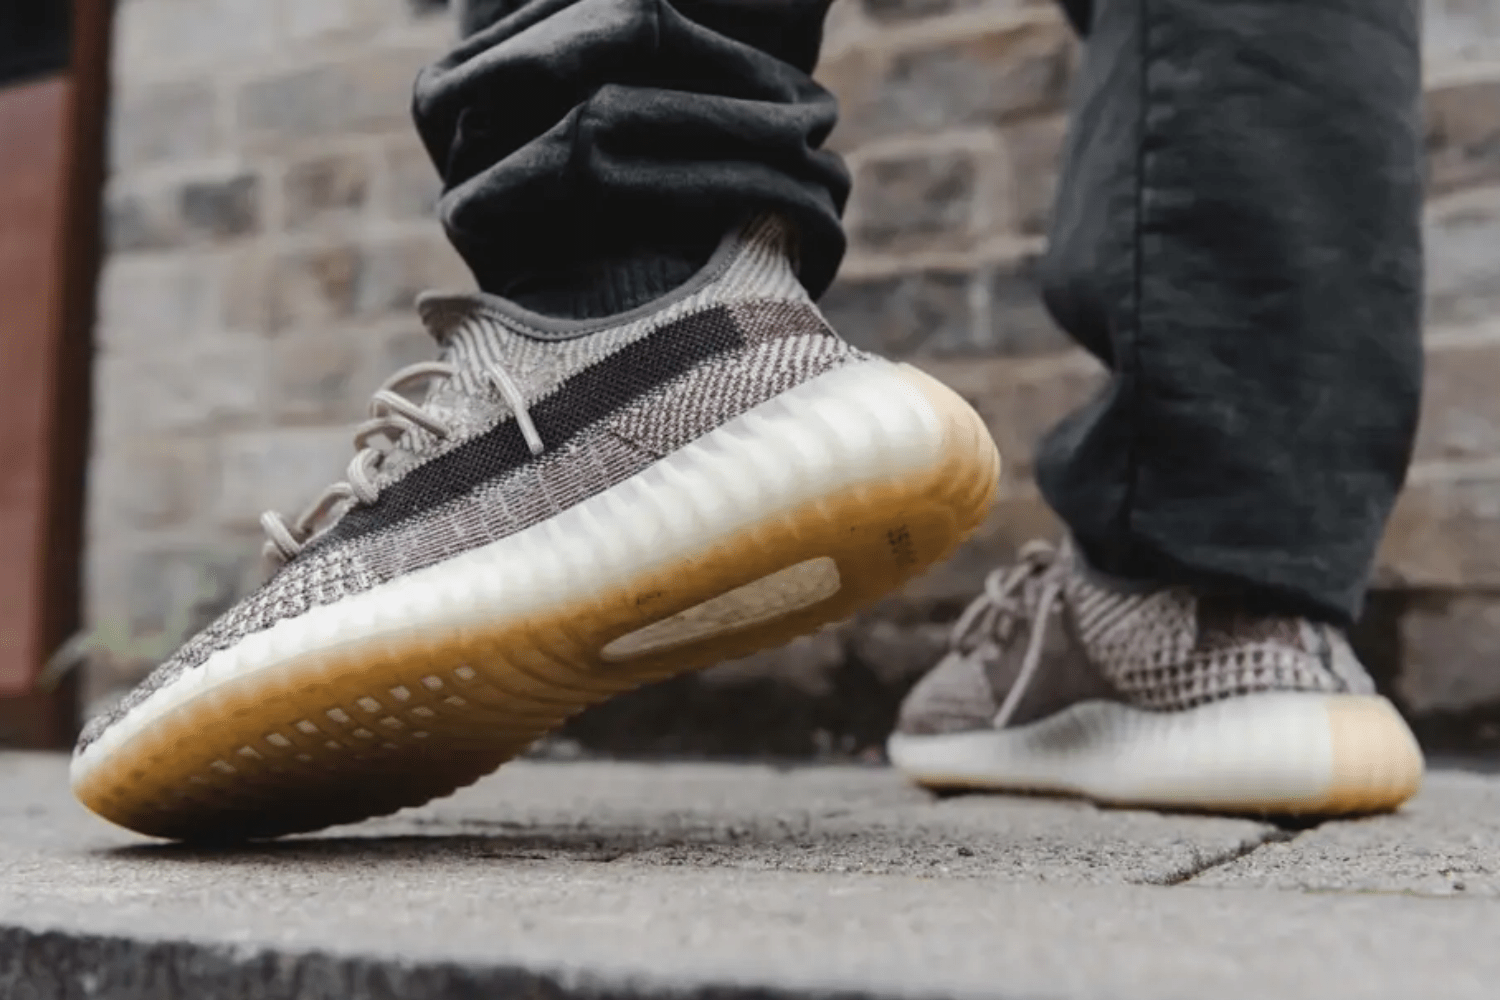 How to style the YEEZY Boost 350 V2?